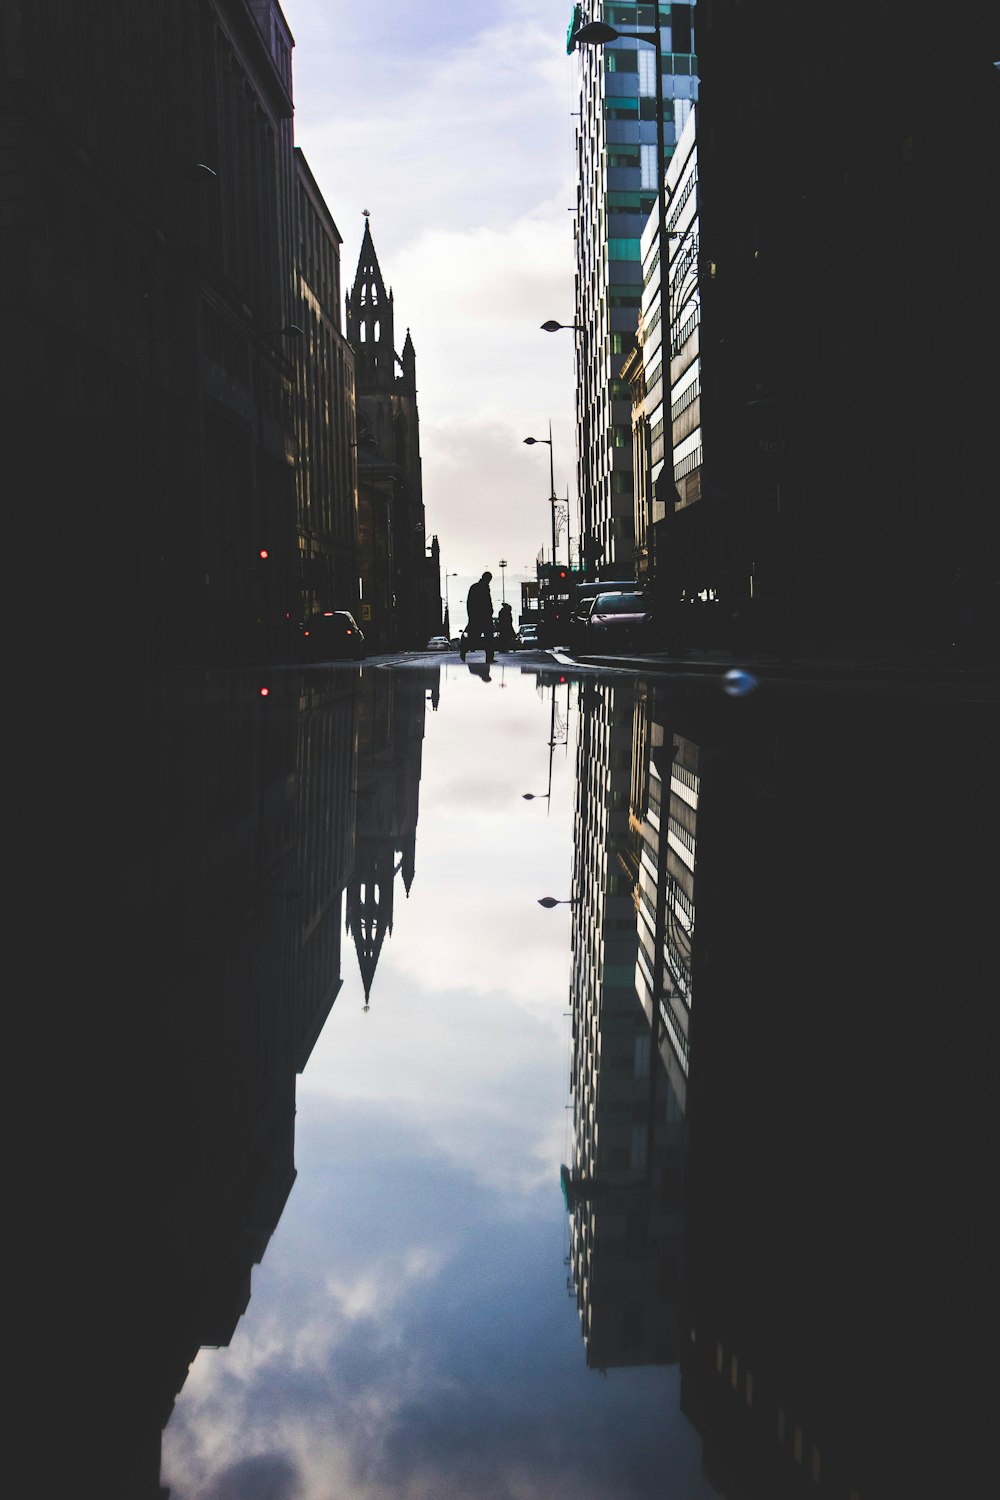 landscape photography of high-rise buildings with reflection on the water